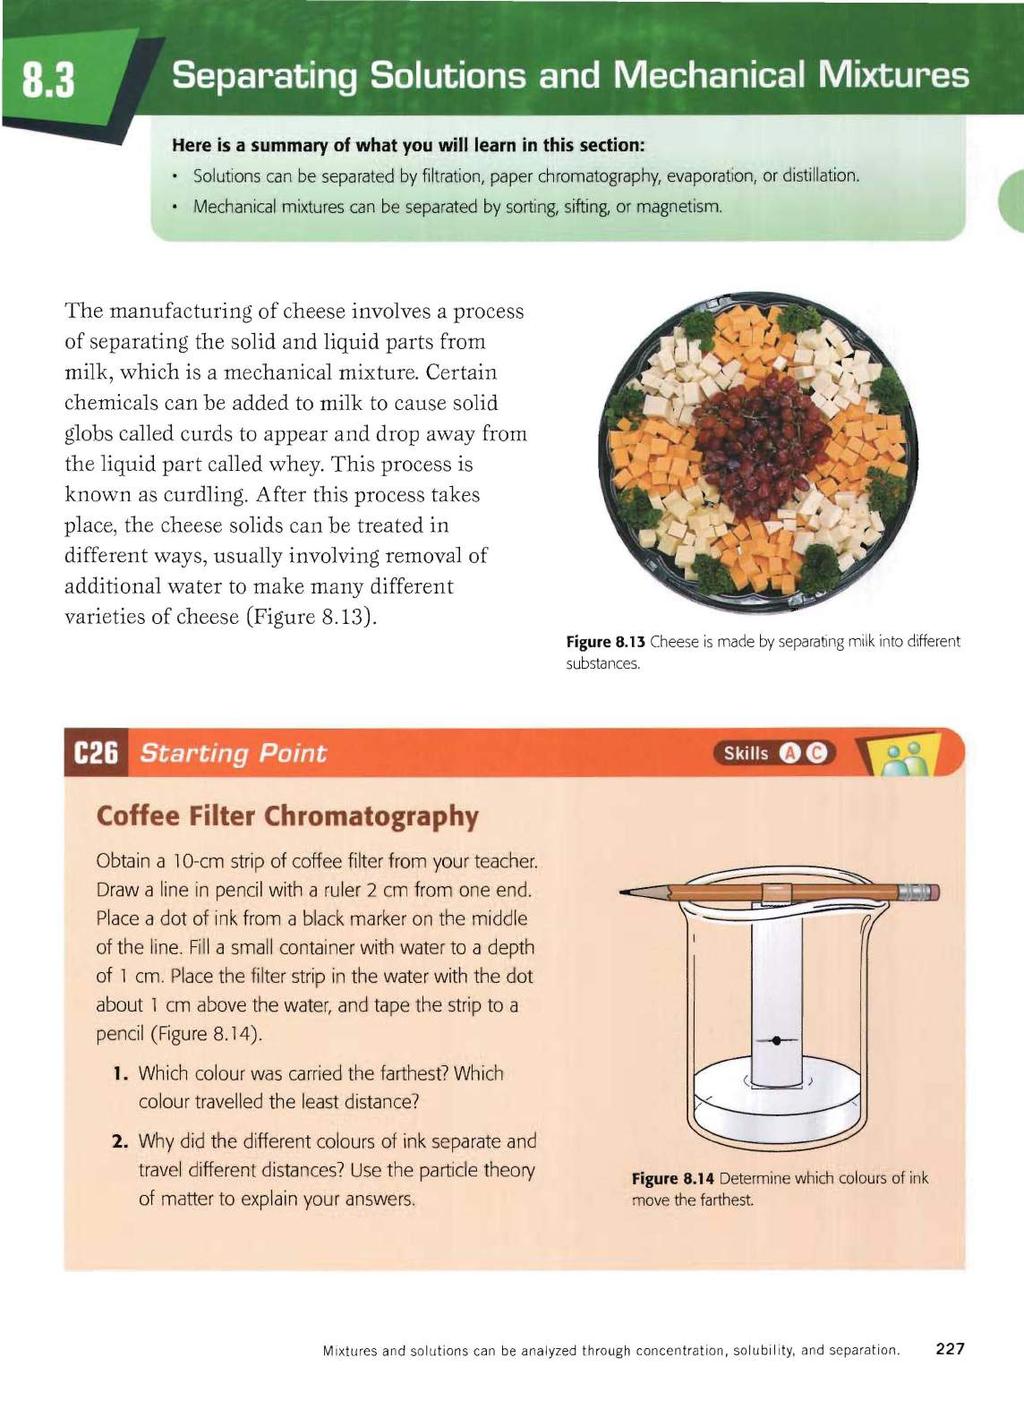 Here is a summary of what you will learn in this section: Solutions can be separated by filtration, paper chromatography, evaporation, or distillation.